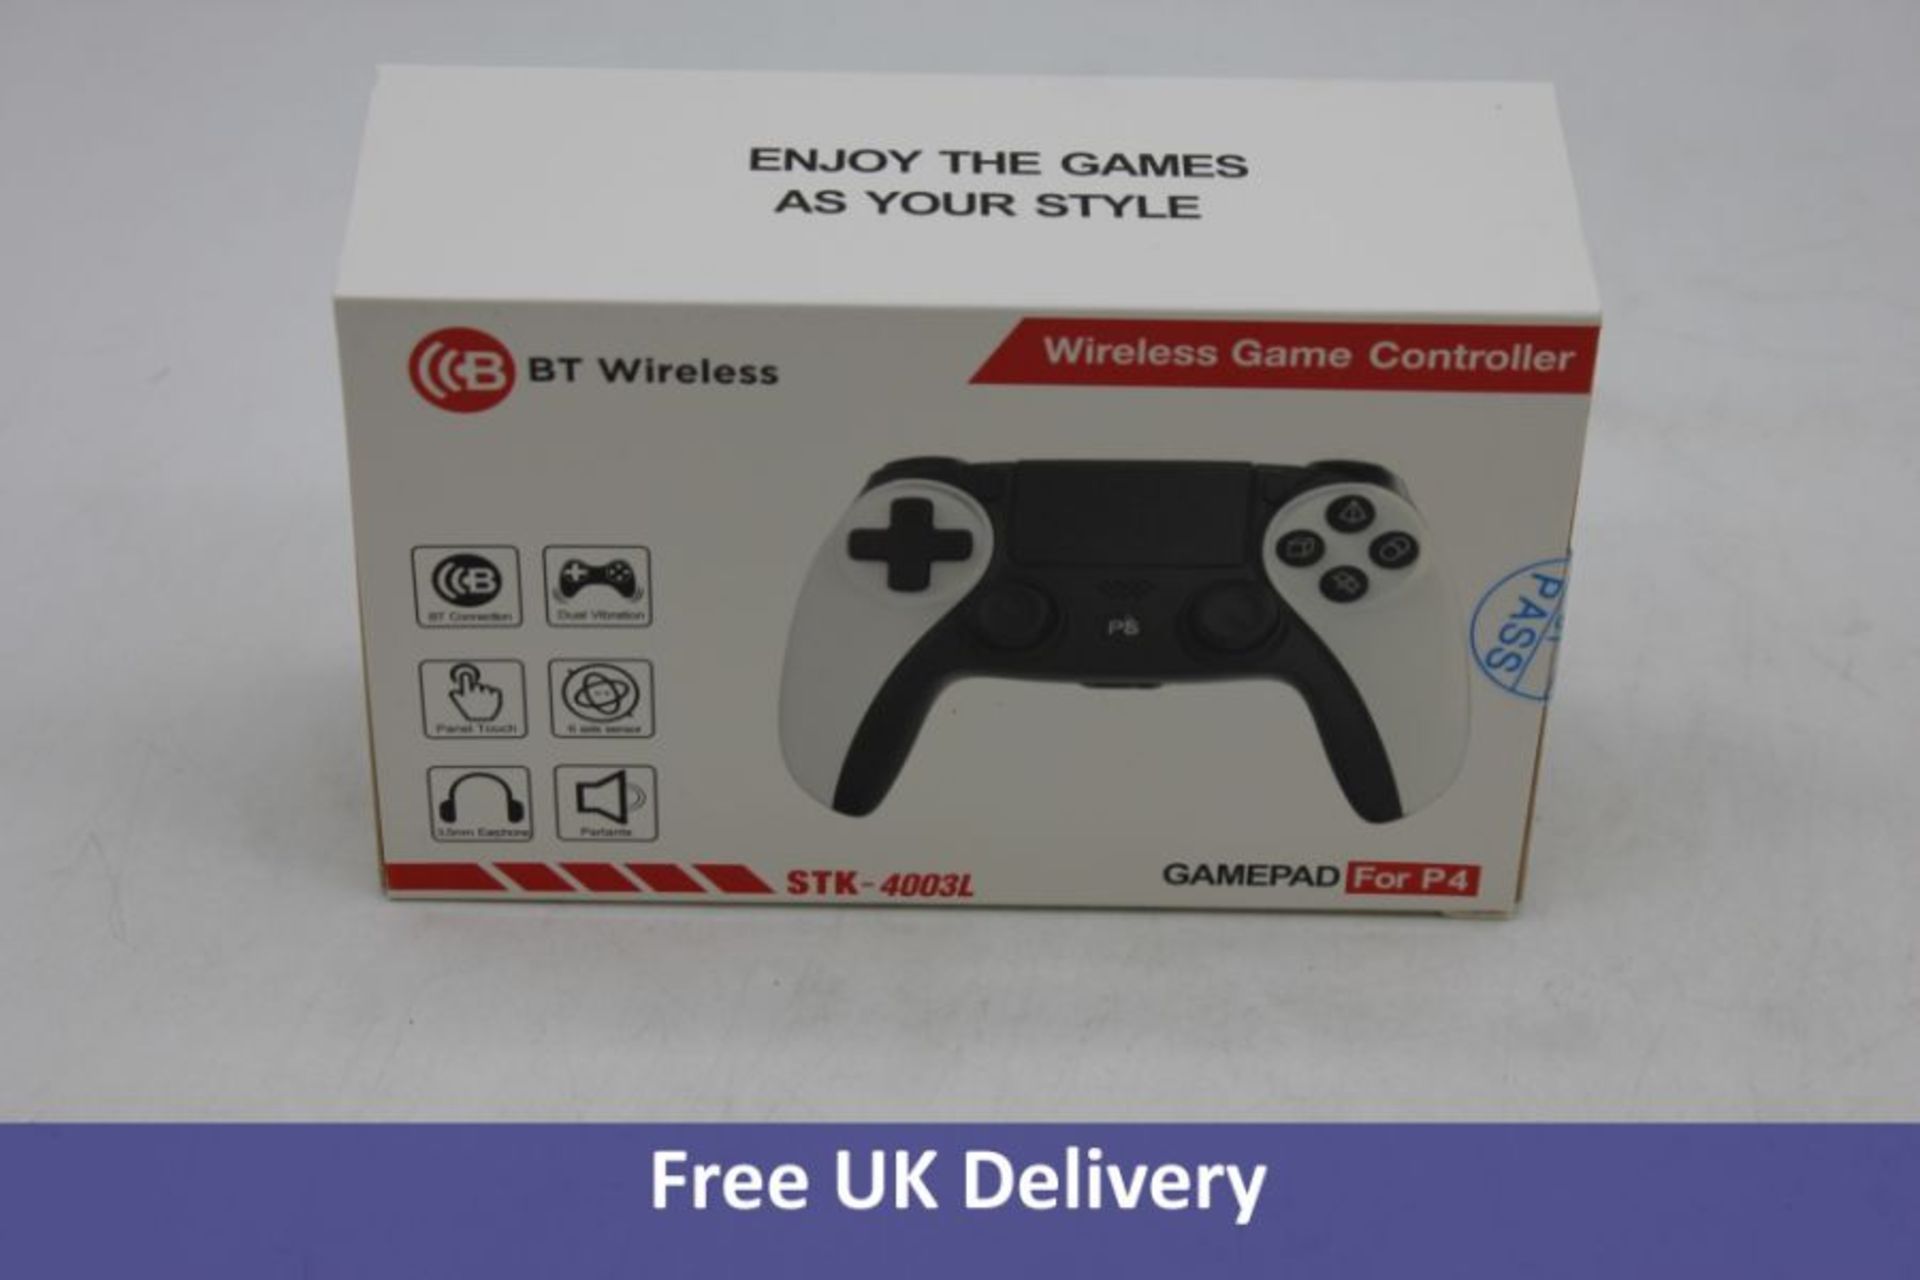 Ten Kingefir STK-4003L Wireless Game Controllers for Playstation 4 with Dual Vibration, White - Image 2 of 2